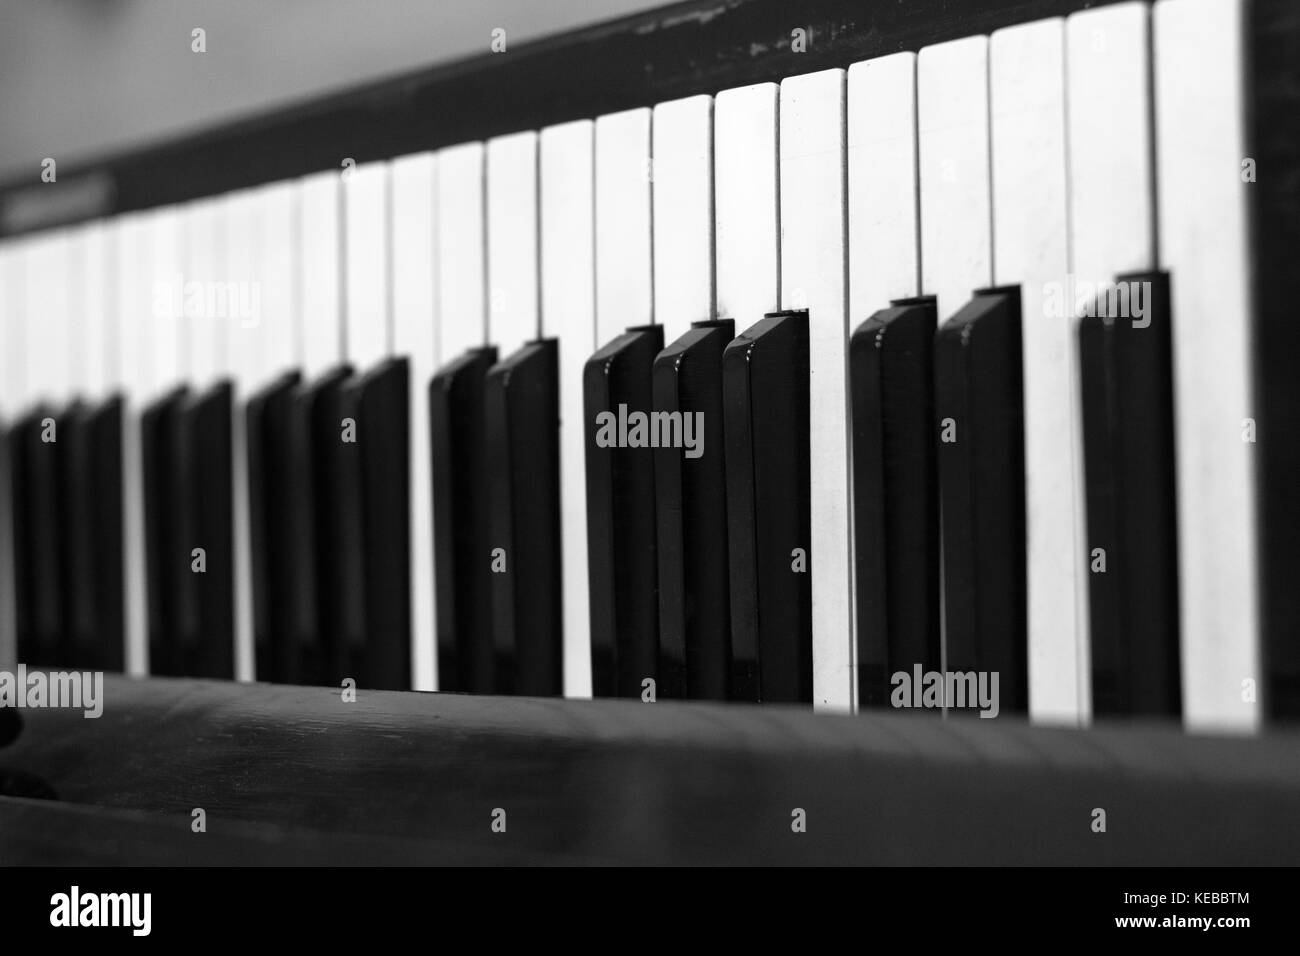 piano keys black and white color Stock Photo